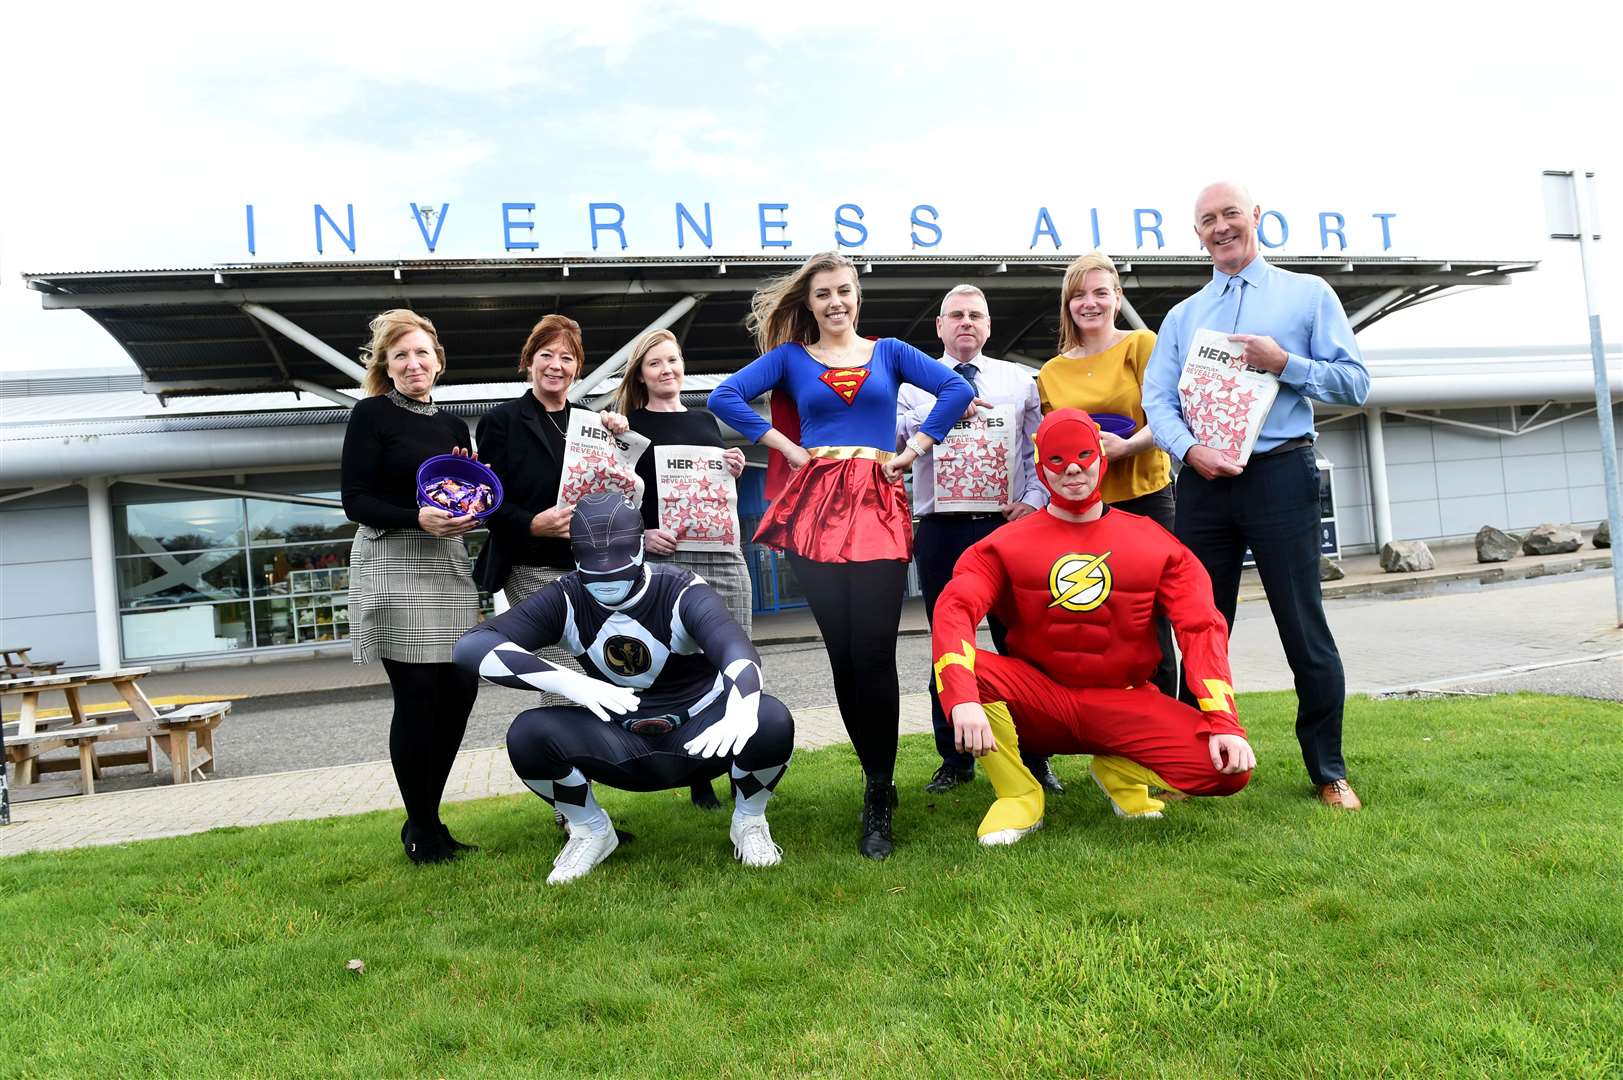 Sweets and newspaper supplements were handed out by superheroes, with help from some Inverness Airport staff.